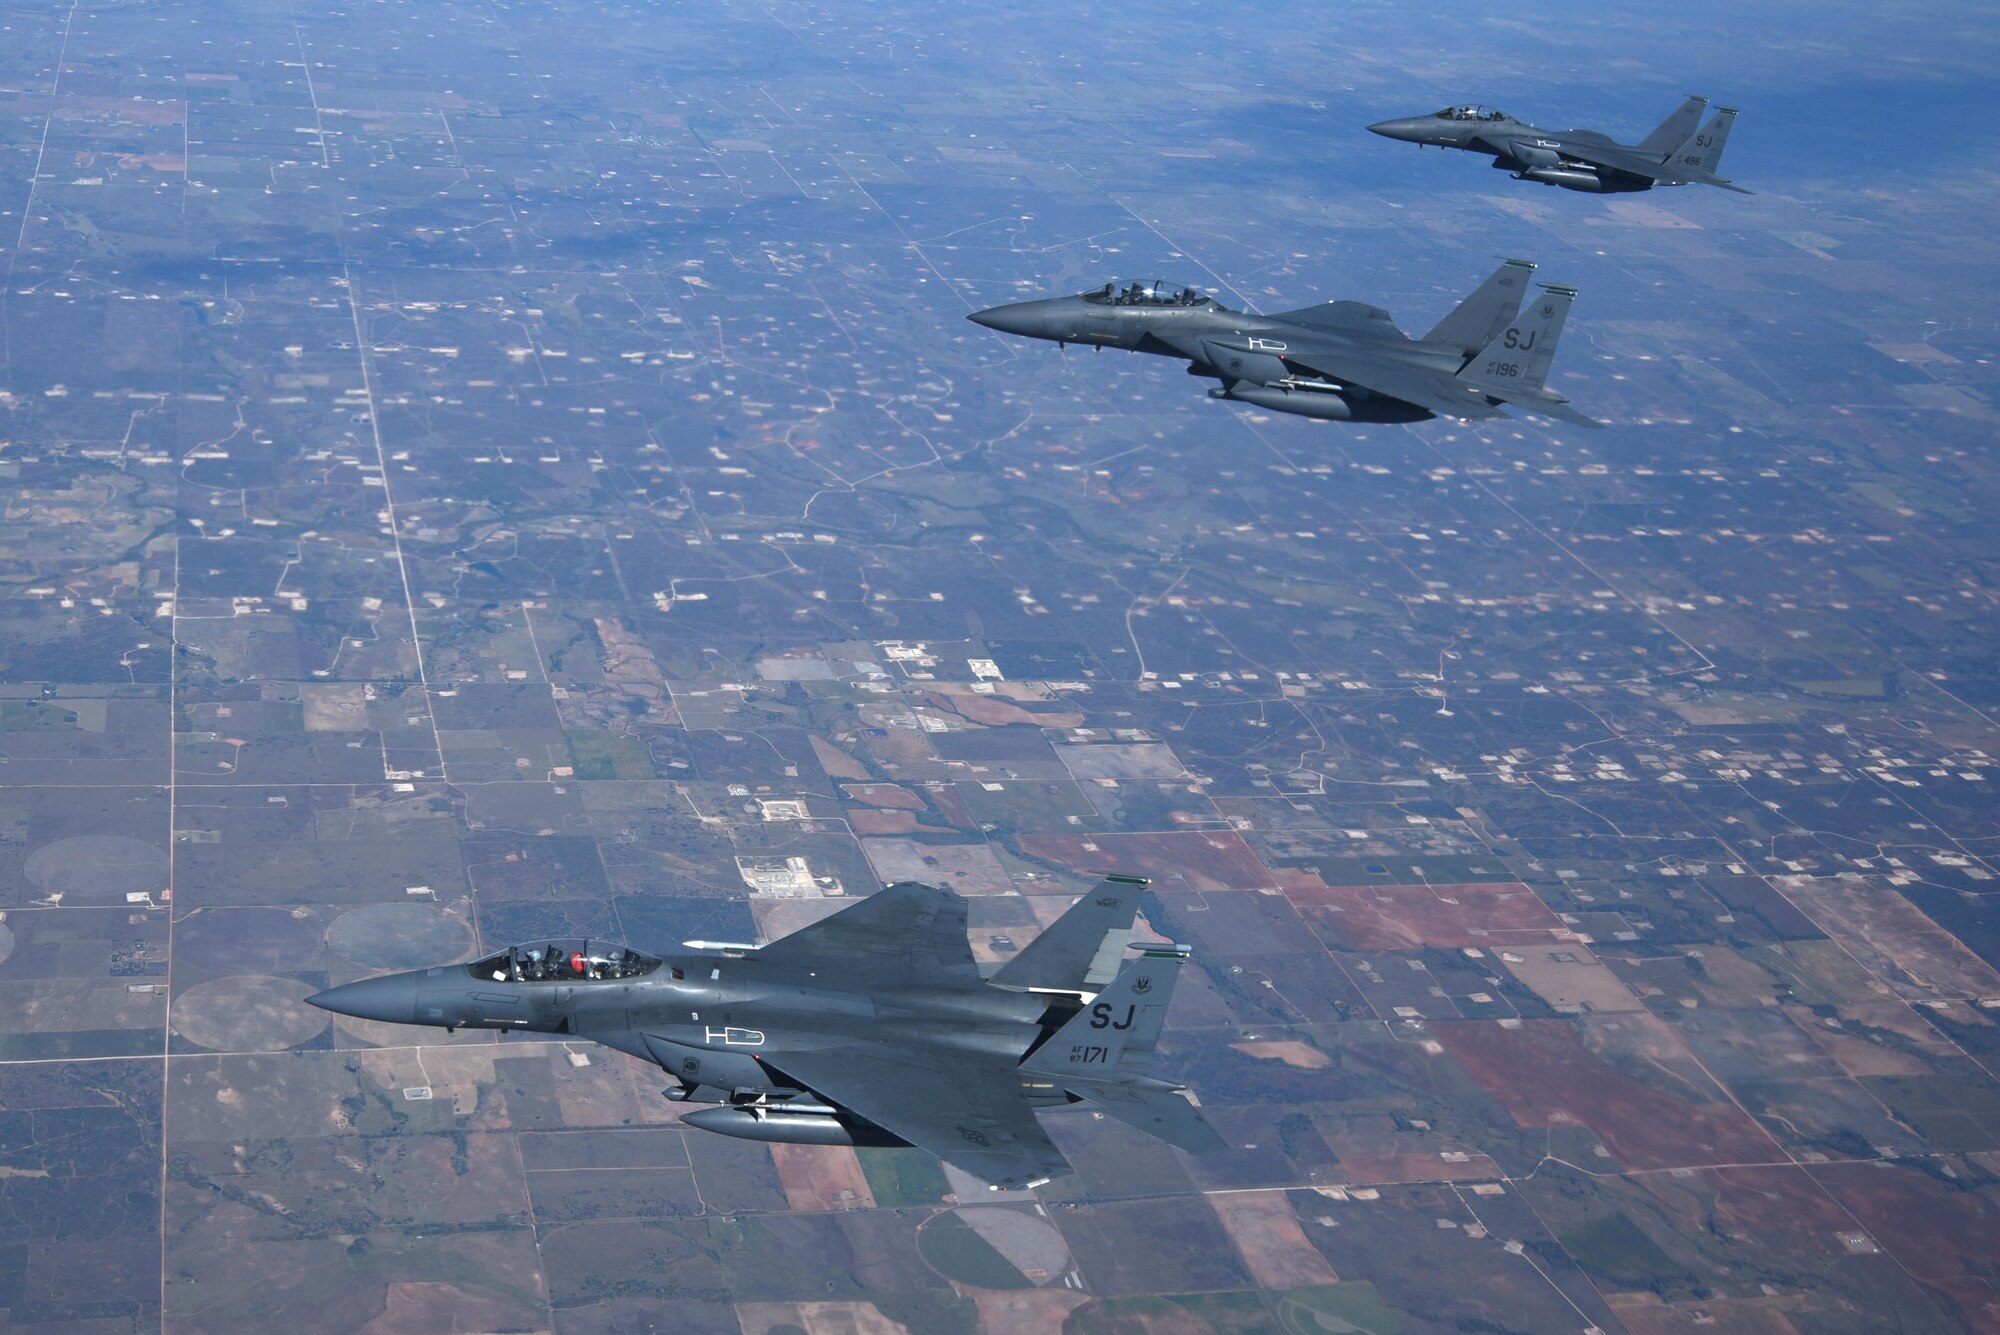 McConnell aircrews refueled 14 F-15 Strike Eagles.